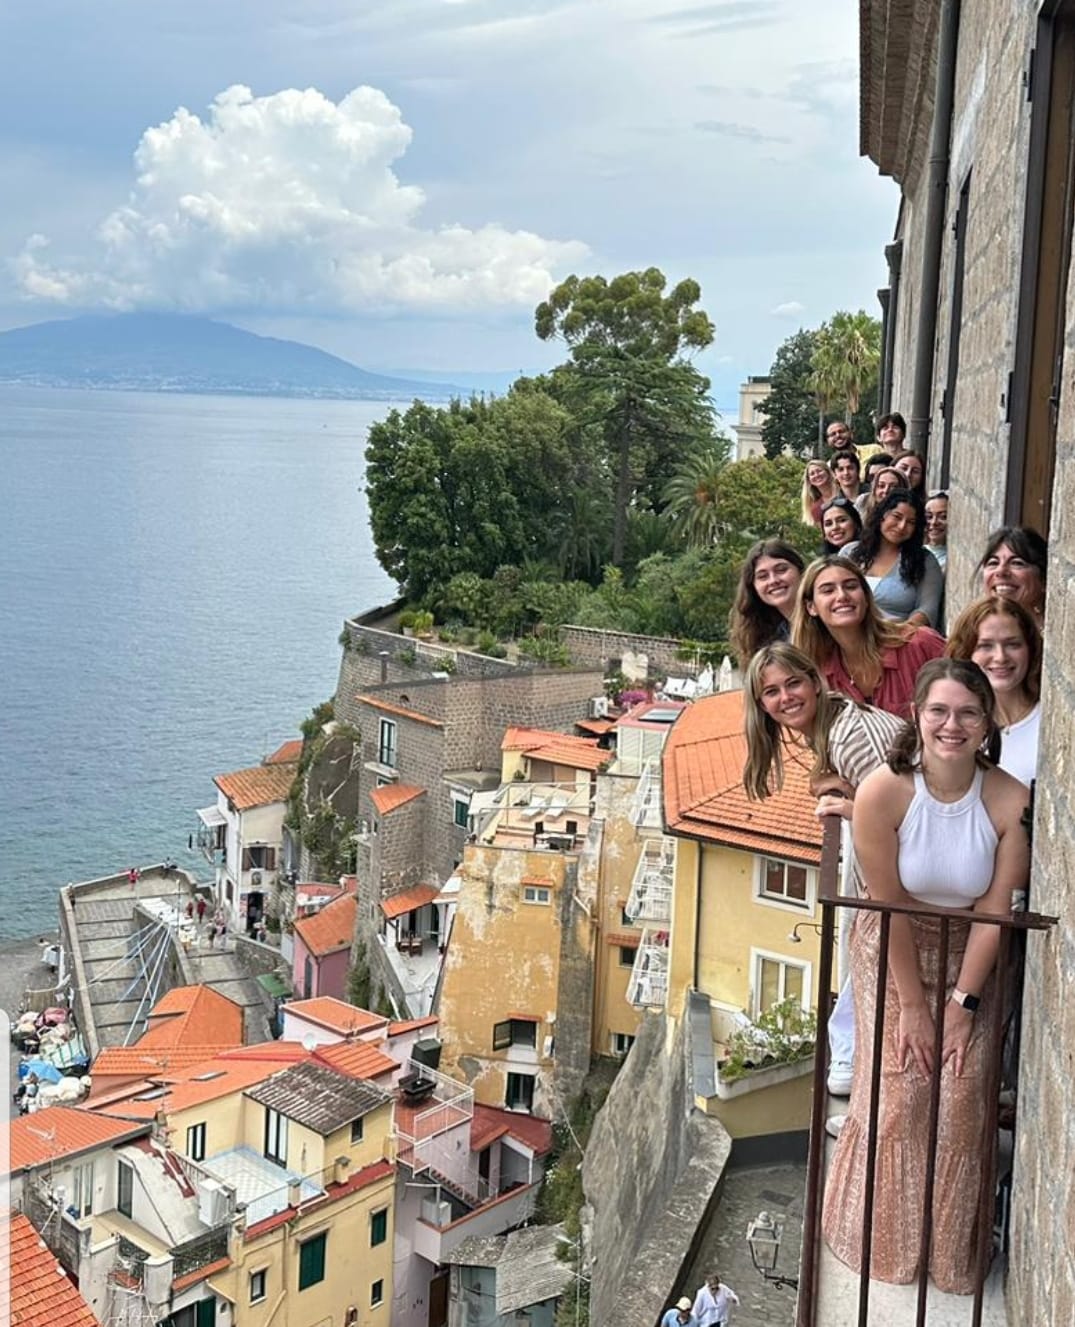 group of women and men smiling, hanging out from balconies, Italian city and sea in background